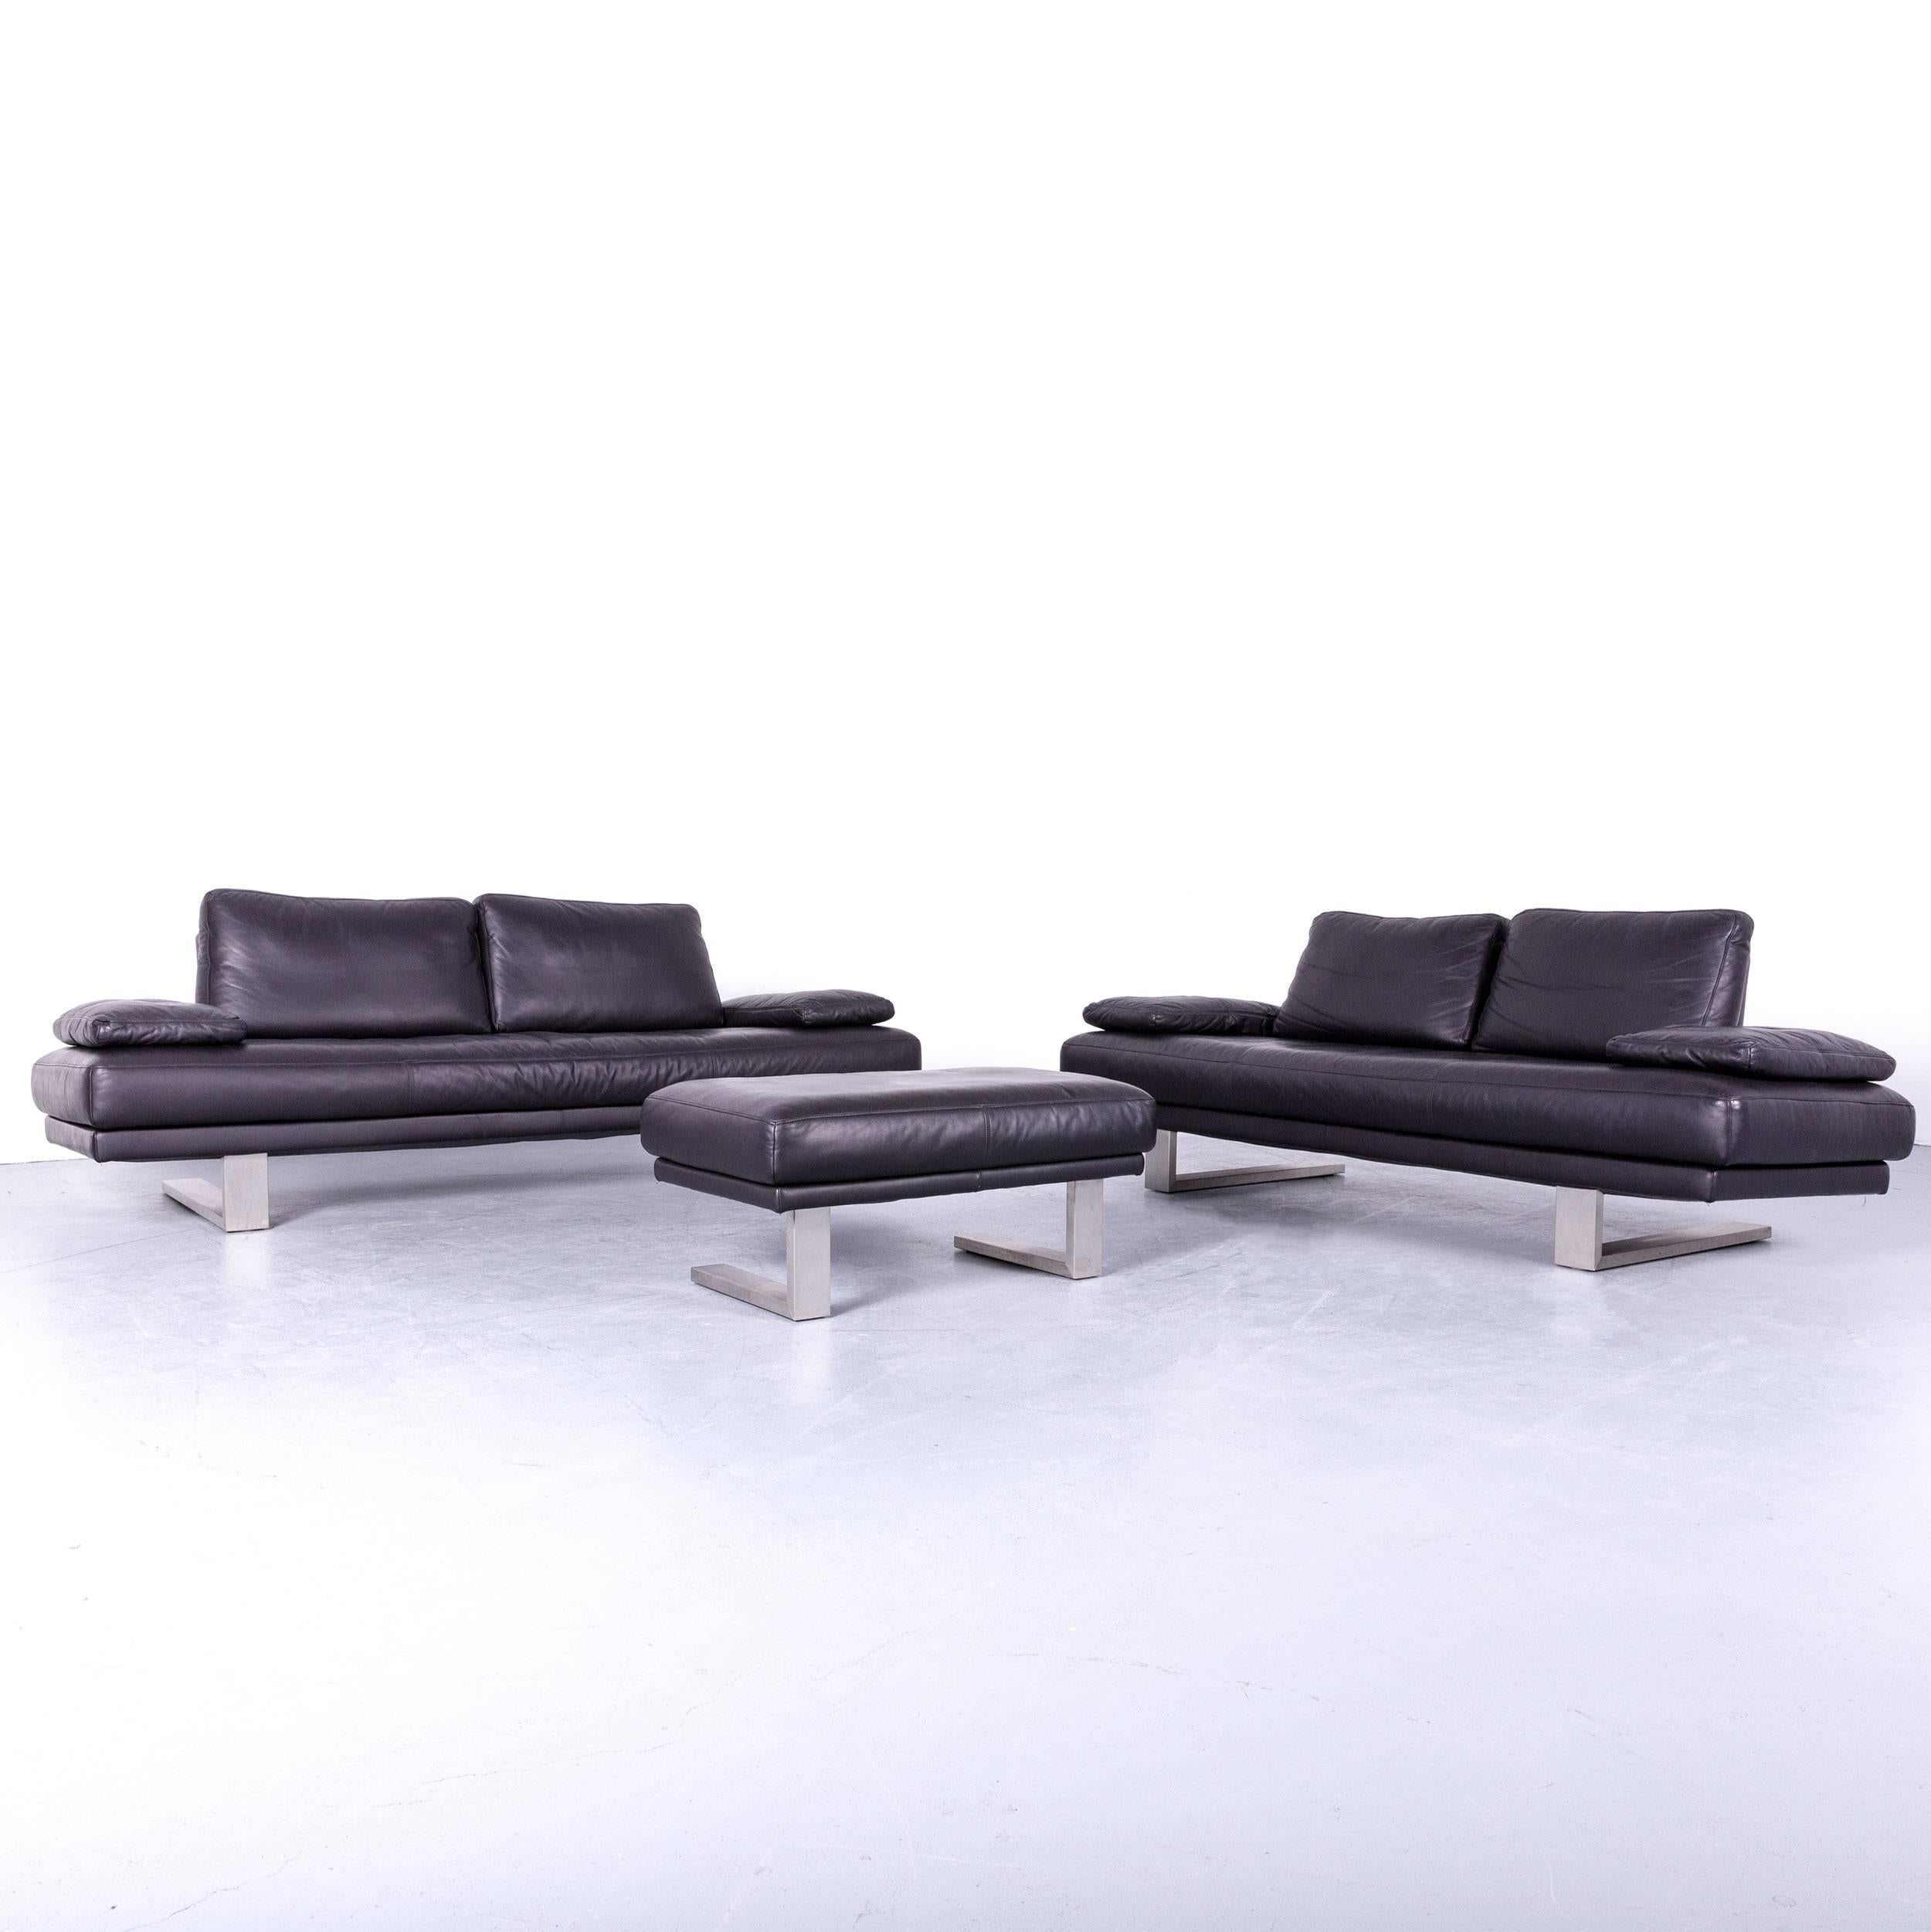 Black colored original Rolf Benz 6600 sofa set, including two sofas and one footstool, in a minimalistic and modern design, made for pure comfort and style.